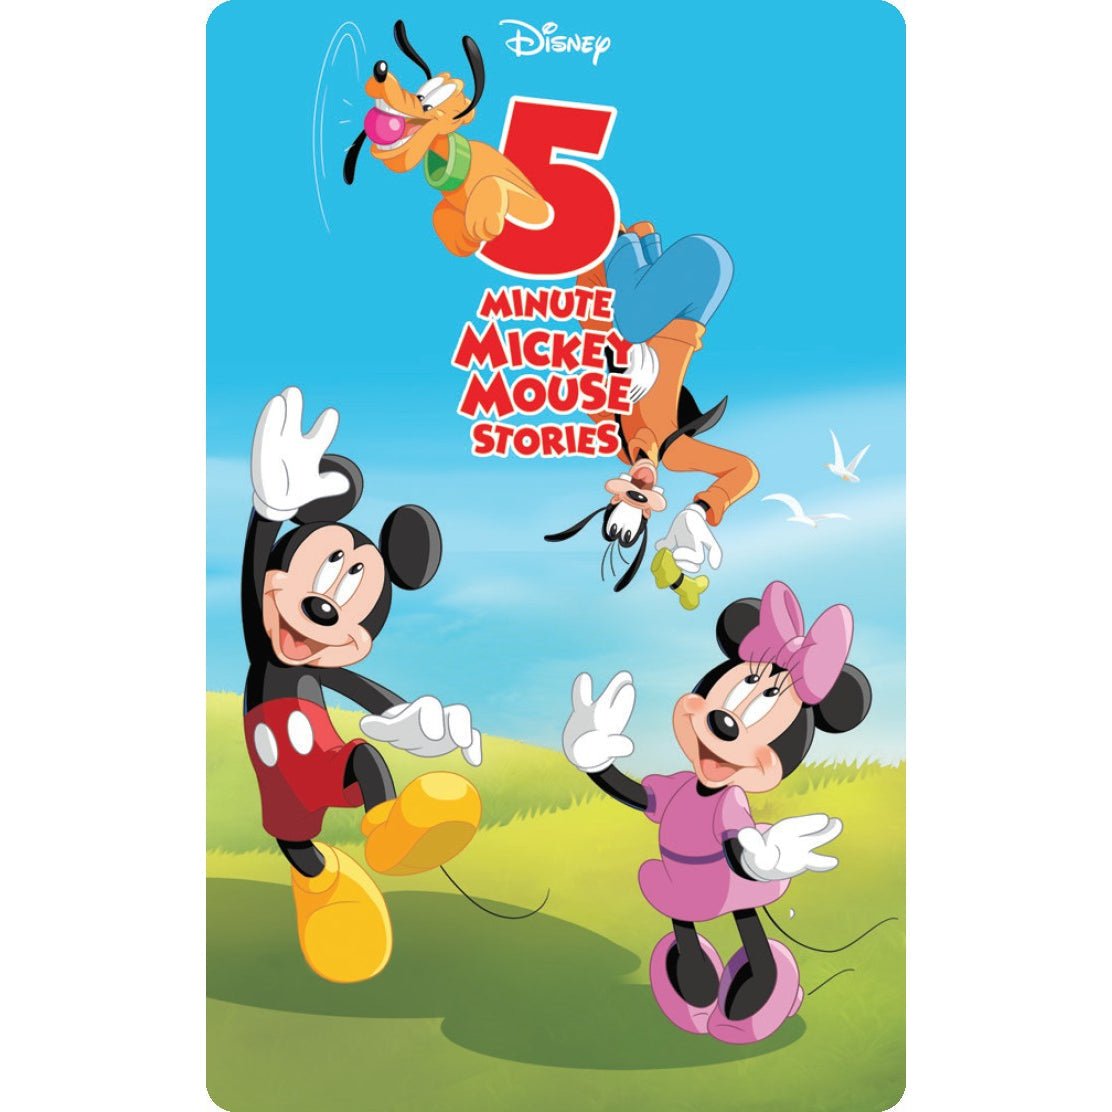 Yoto Card - Disney's 5 Minute Mickey Mouse Stories - Child Friendly Audio Story Card for the Yoto Player